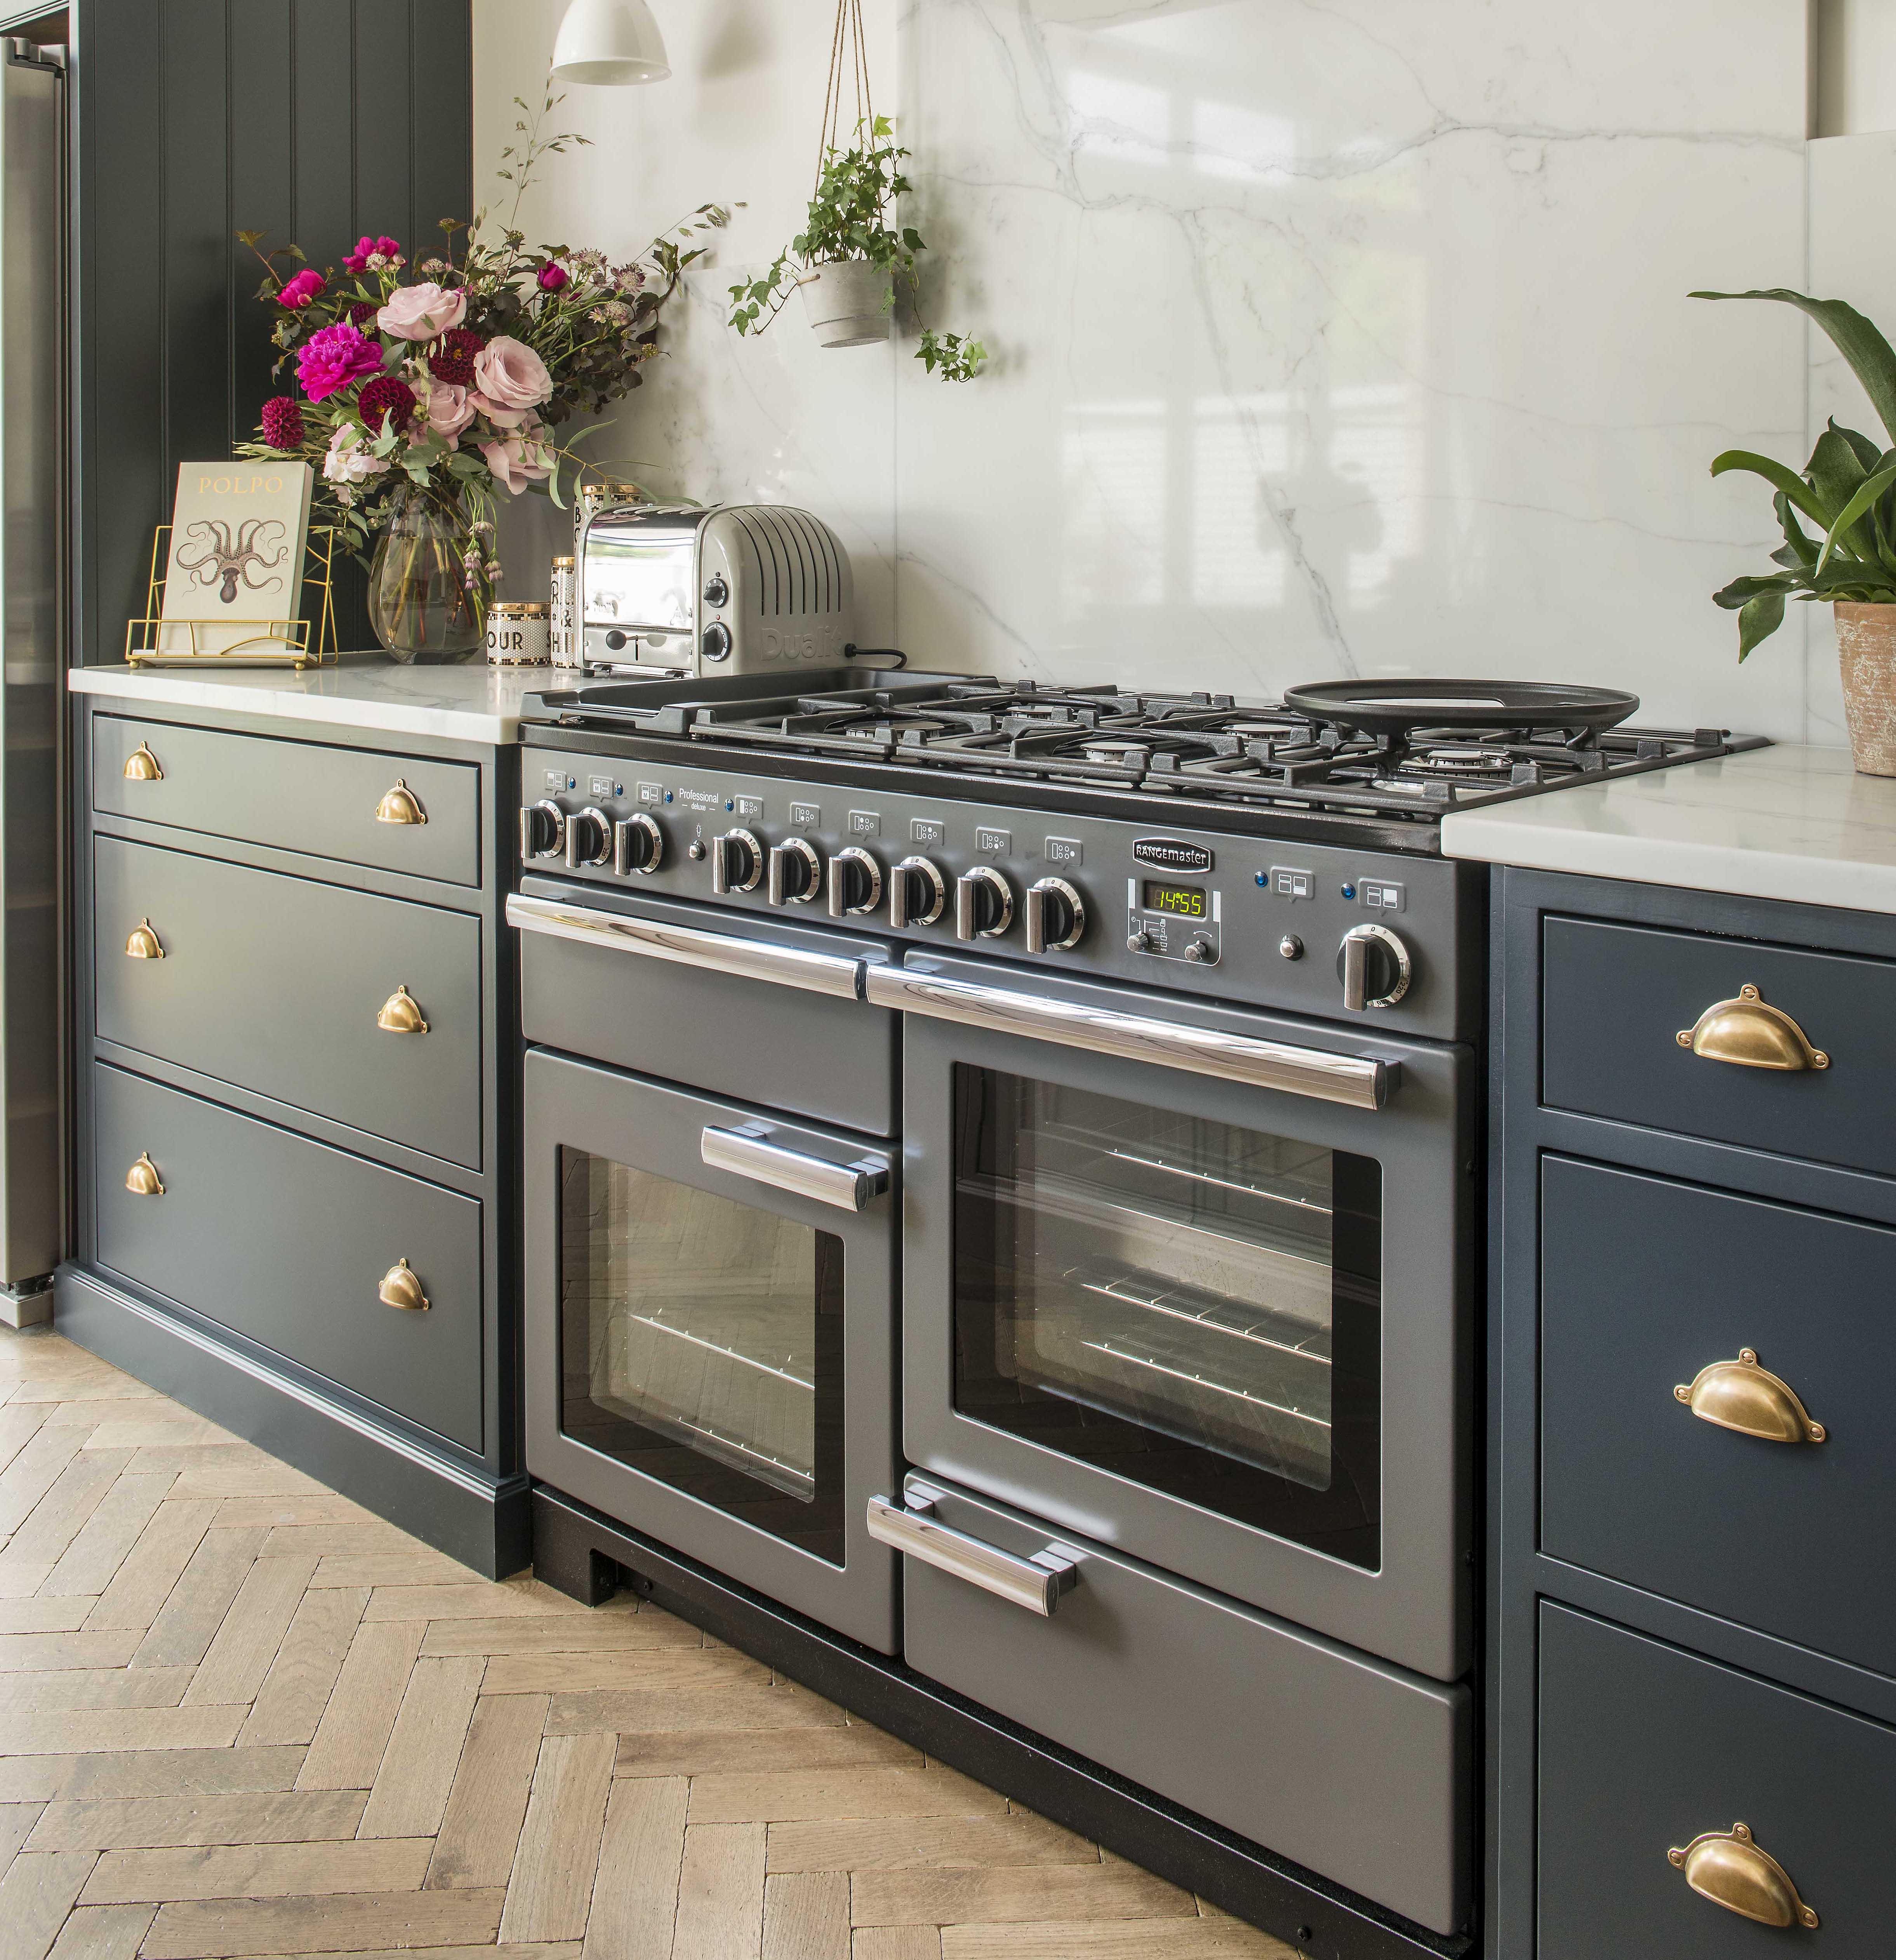 Range Cookers For Larger Spaces - The Rangecookers Blog